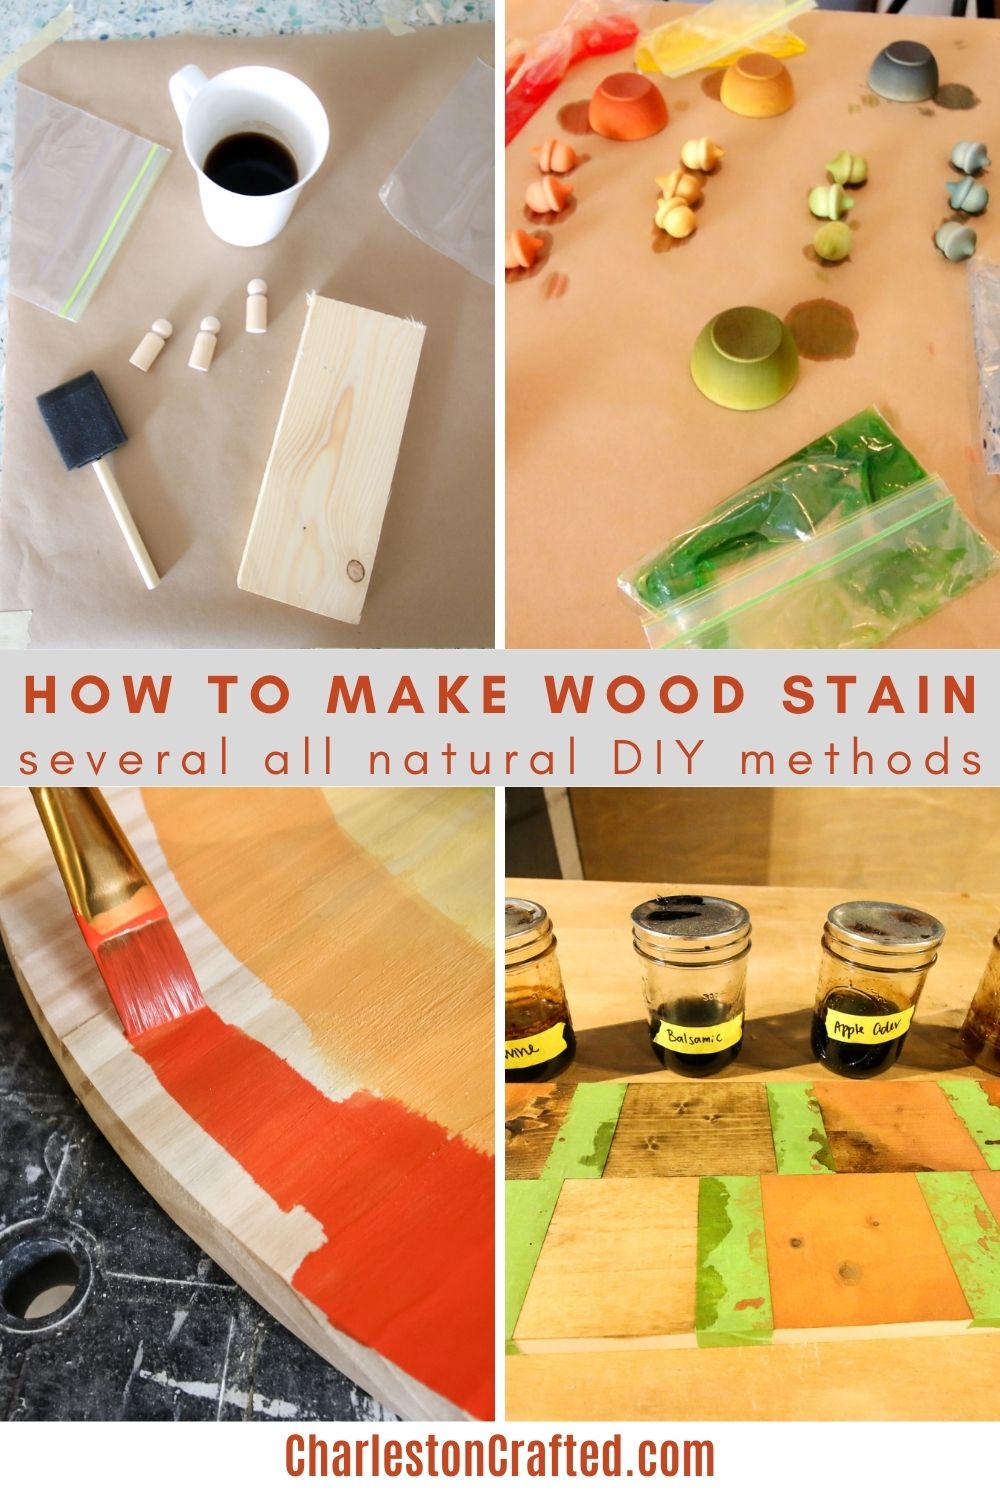 Make A Natural DIY Wood Stain With This Handy Kitchen Ingredient